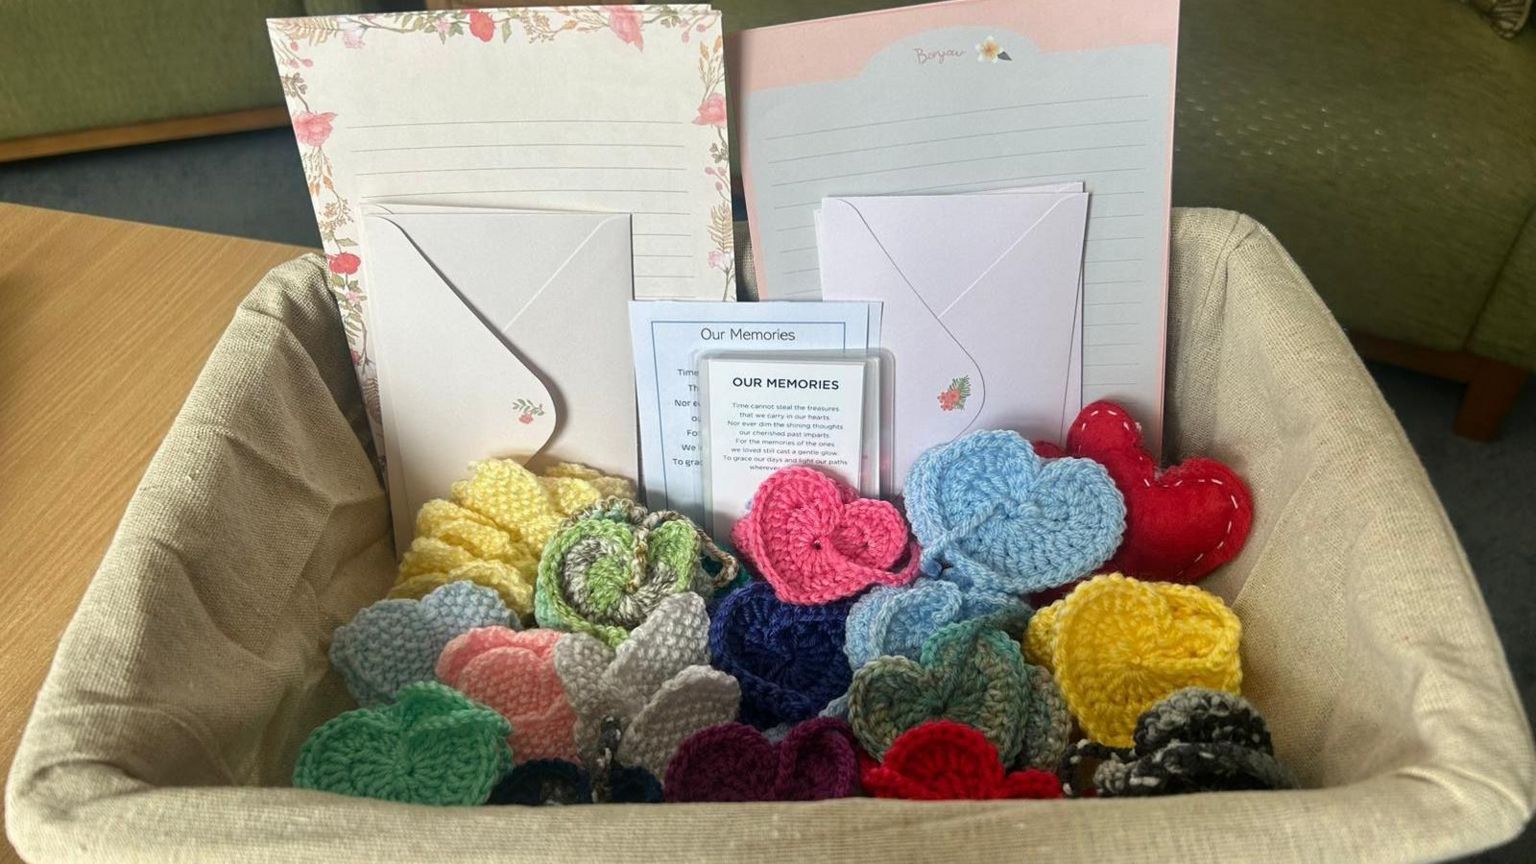 Crocheted hearts and memory envelopes in basket